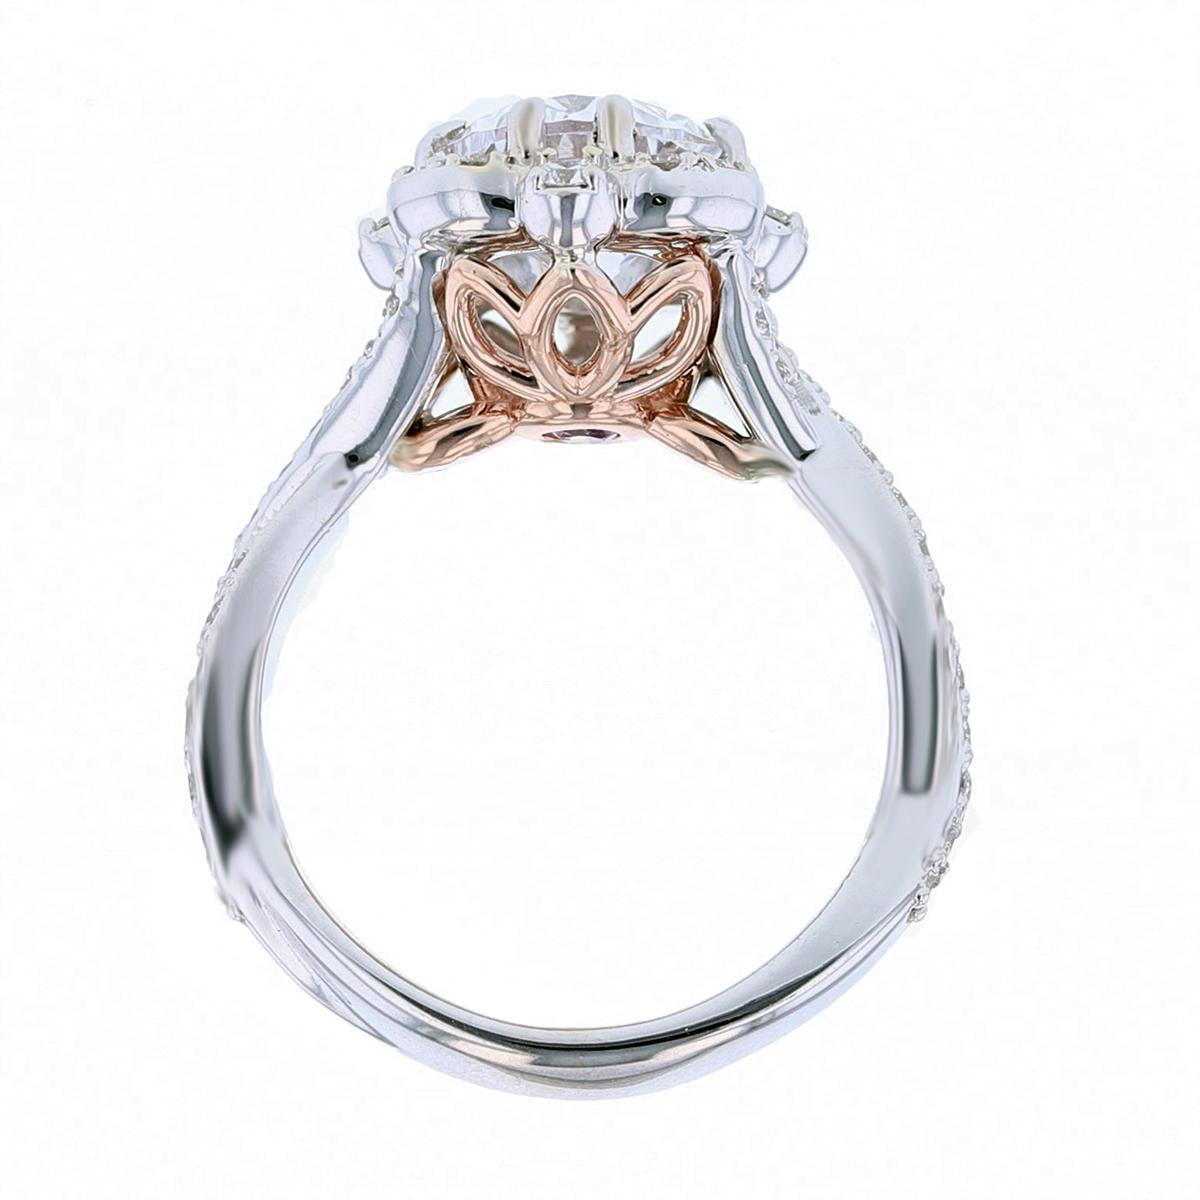 This ring is made in 14k white and rose gold and features a 2.02ct oval shape diamond color grade (G) clarity grade (VS1) Gia certified. The certificate number is 